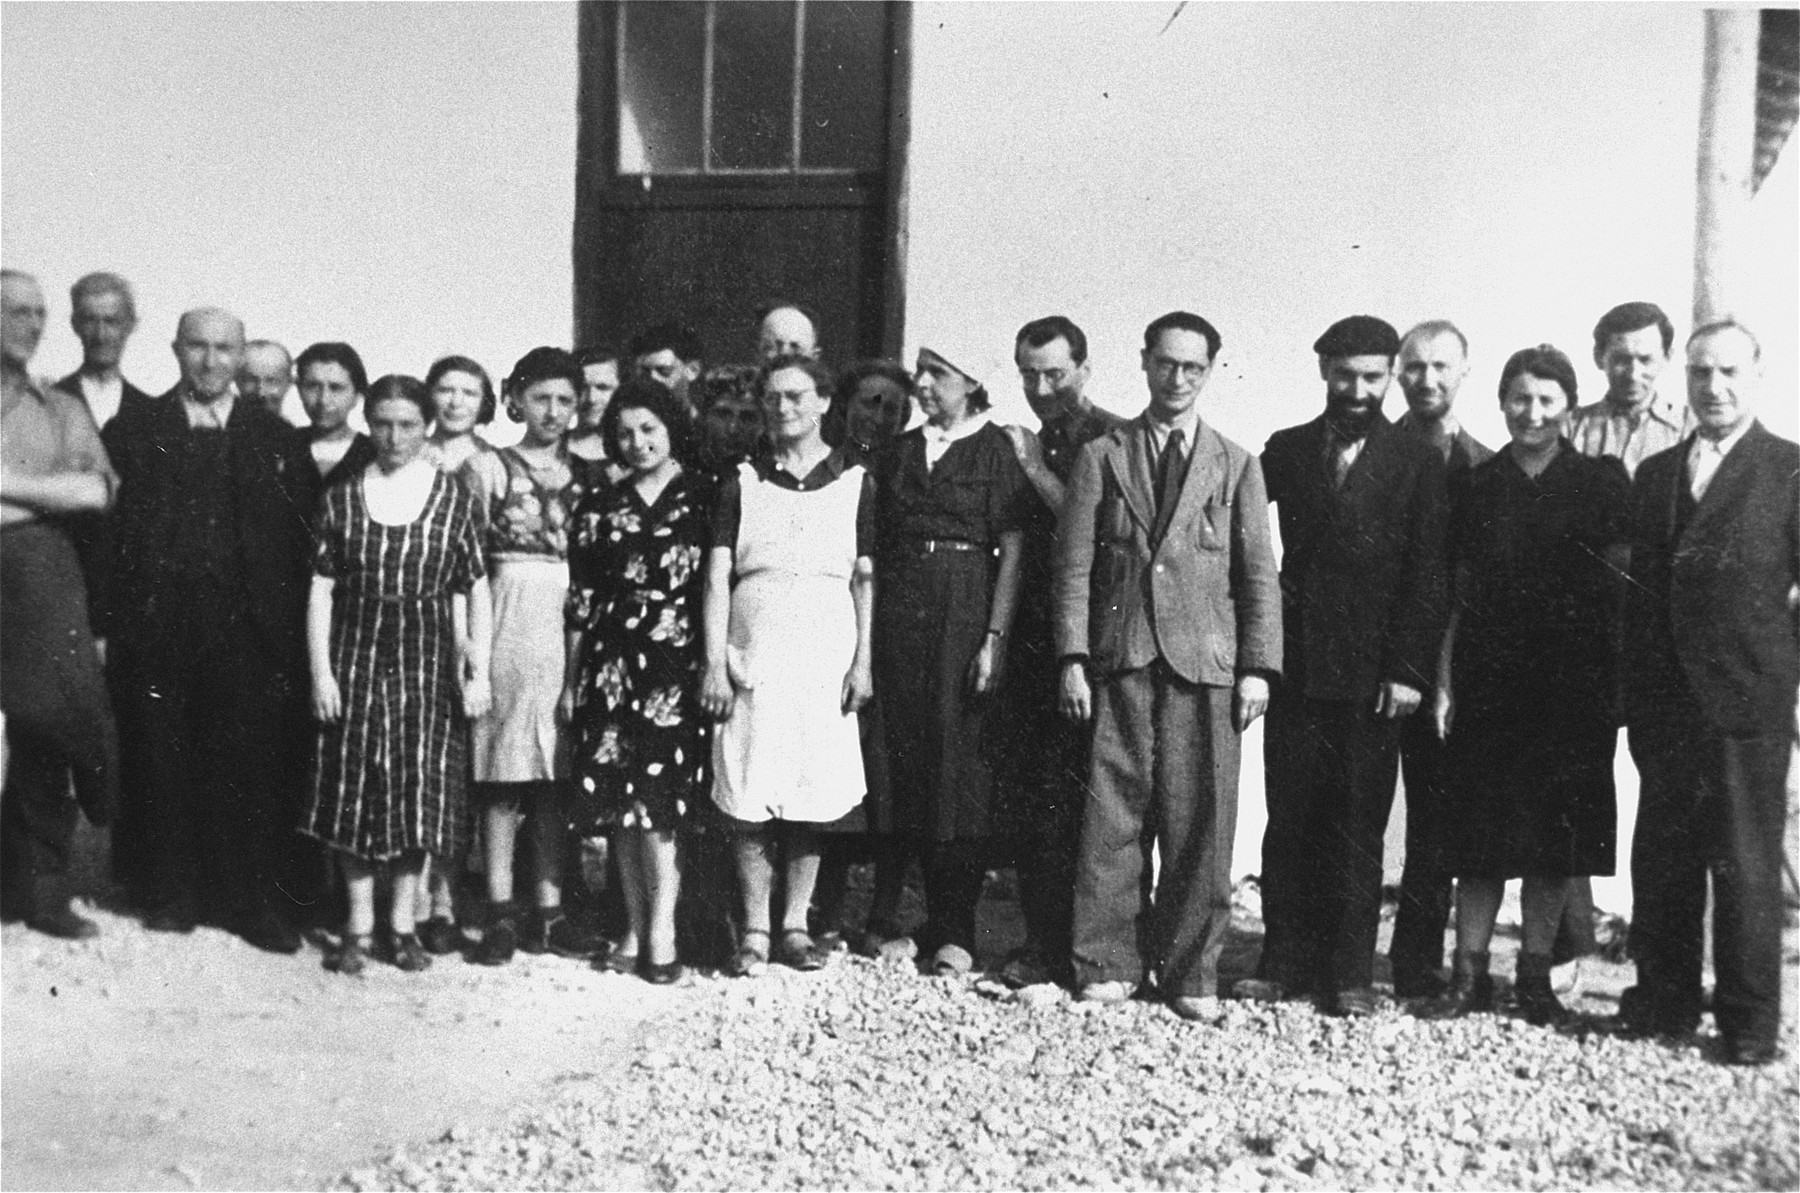 Members of "Le Comite," a group of prisoners who aided the OSE in Rivesaltes.

Those pictured include Erwin Heilbronner (fourth from right) and his wife Flora Heilbronner (fifth from left).